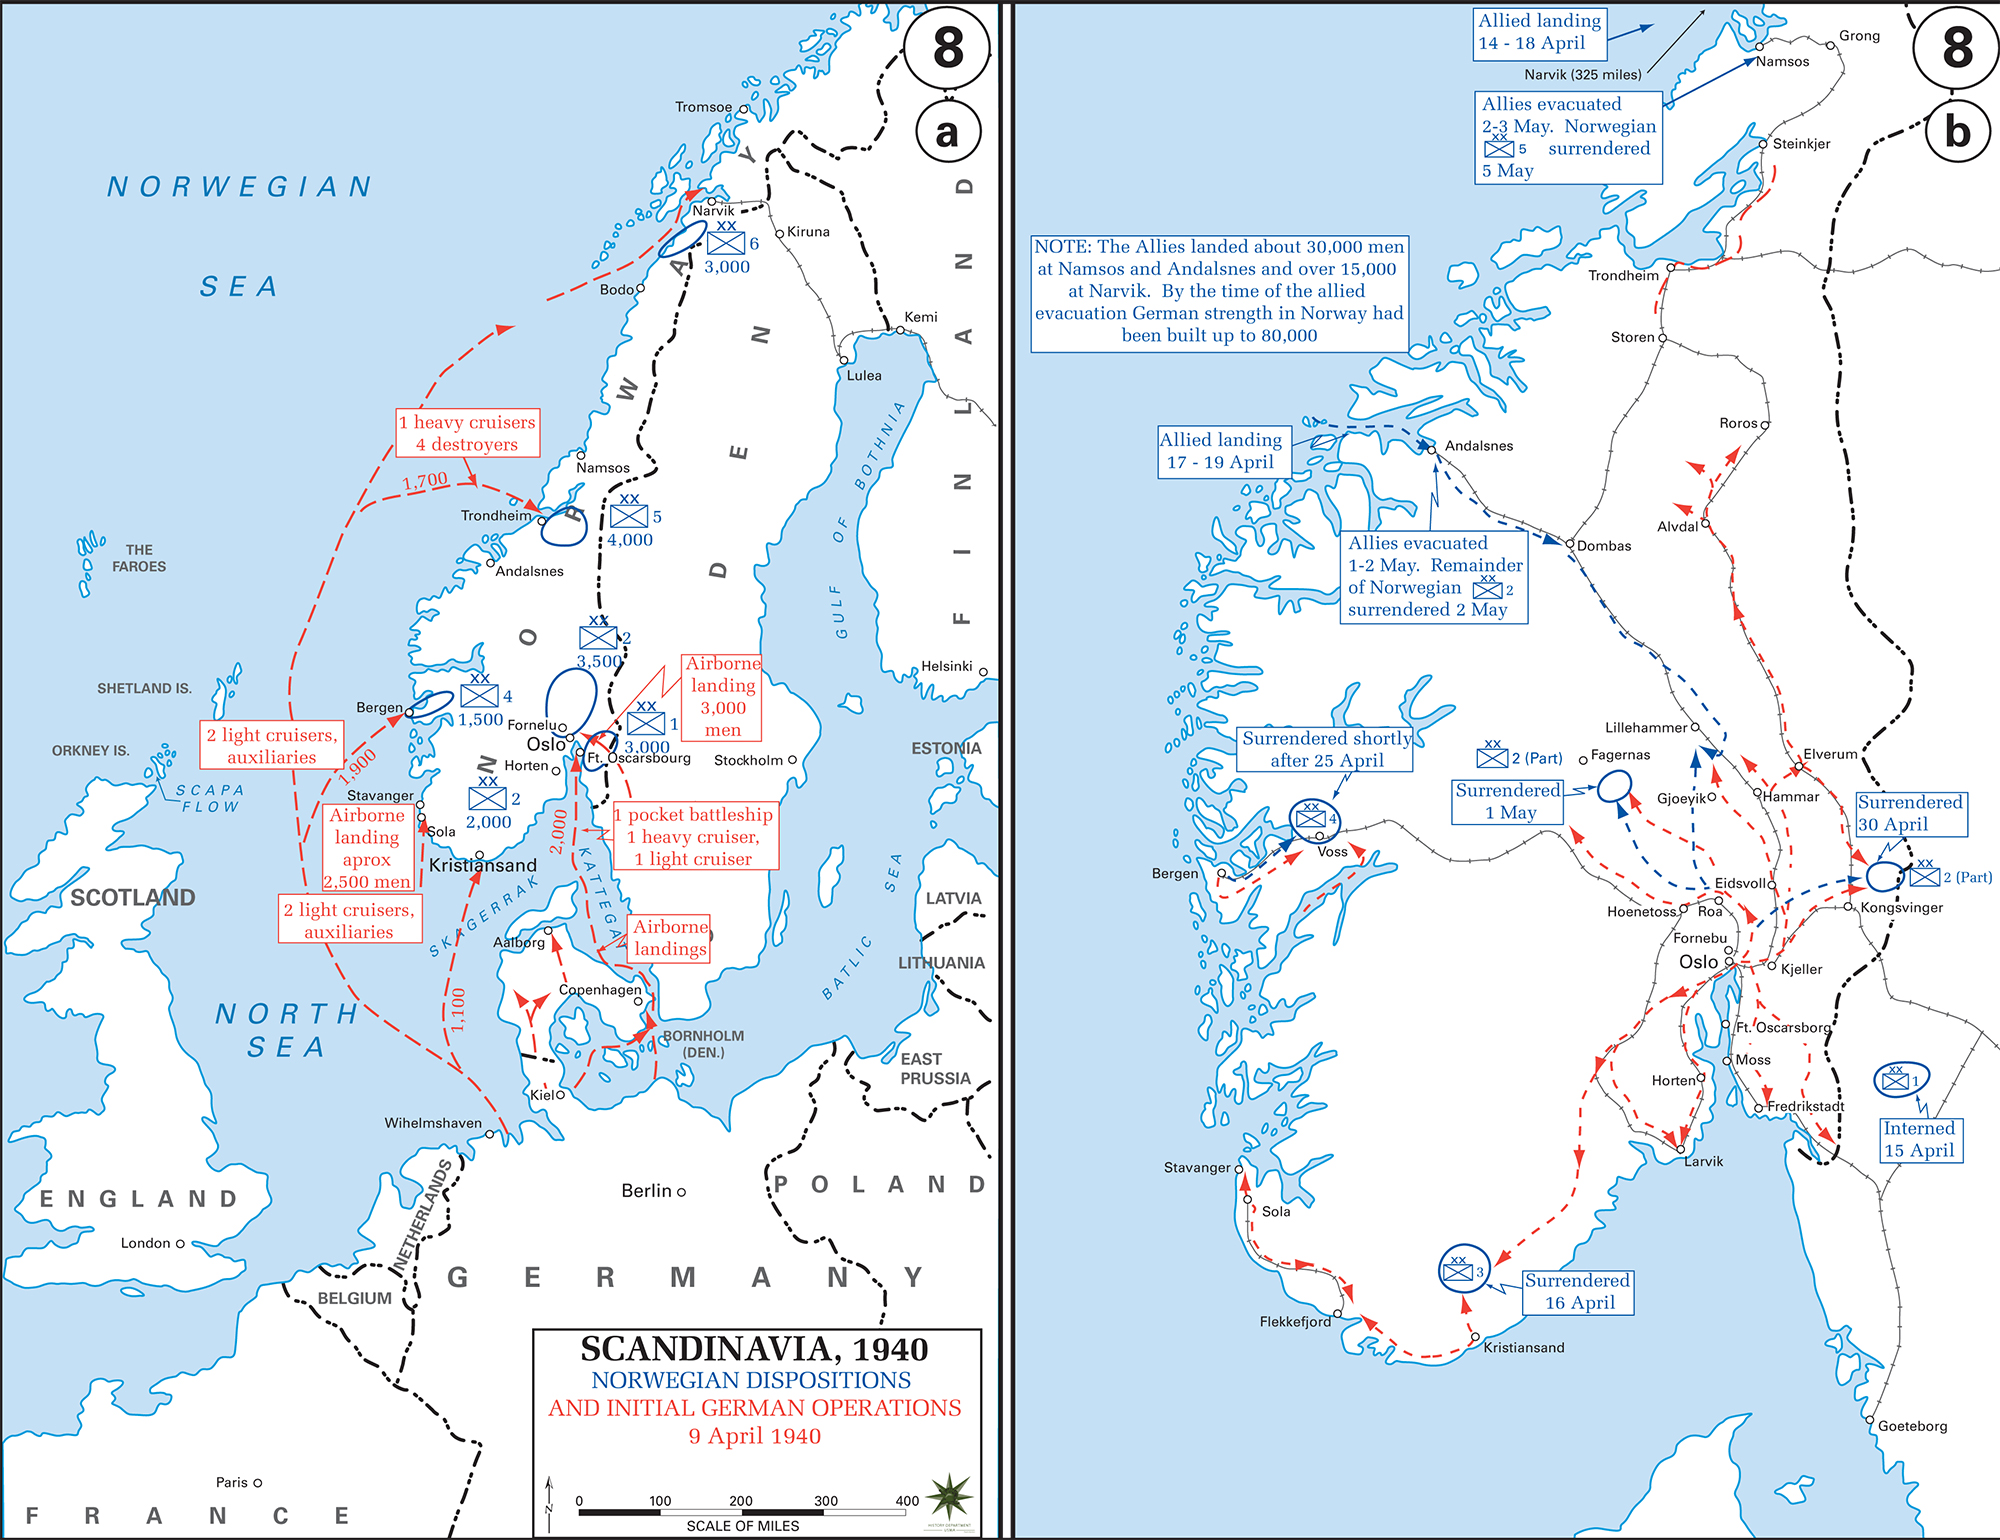 History Map of Scandinavia 1940: Norwegian dispositions and Initial German Operations April 9, 1940Norwegian dispositions and Initial German Operations April 9, 1940